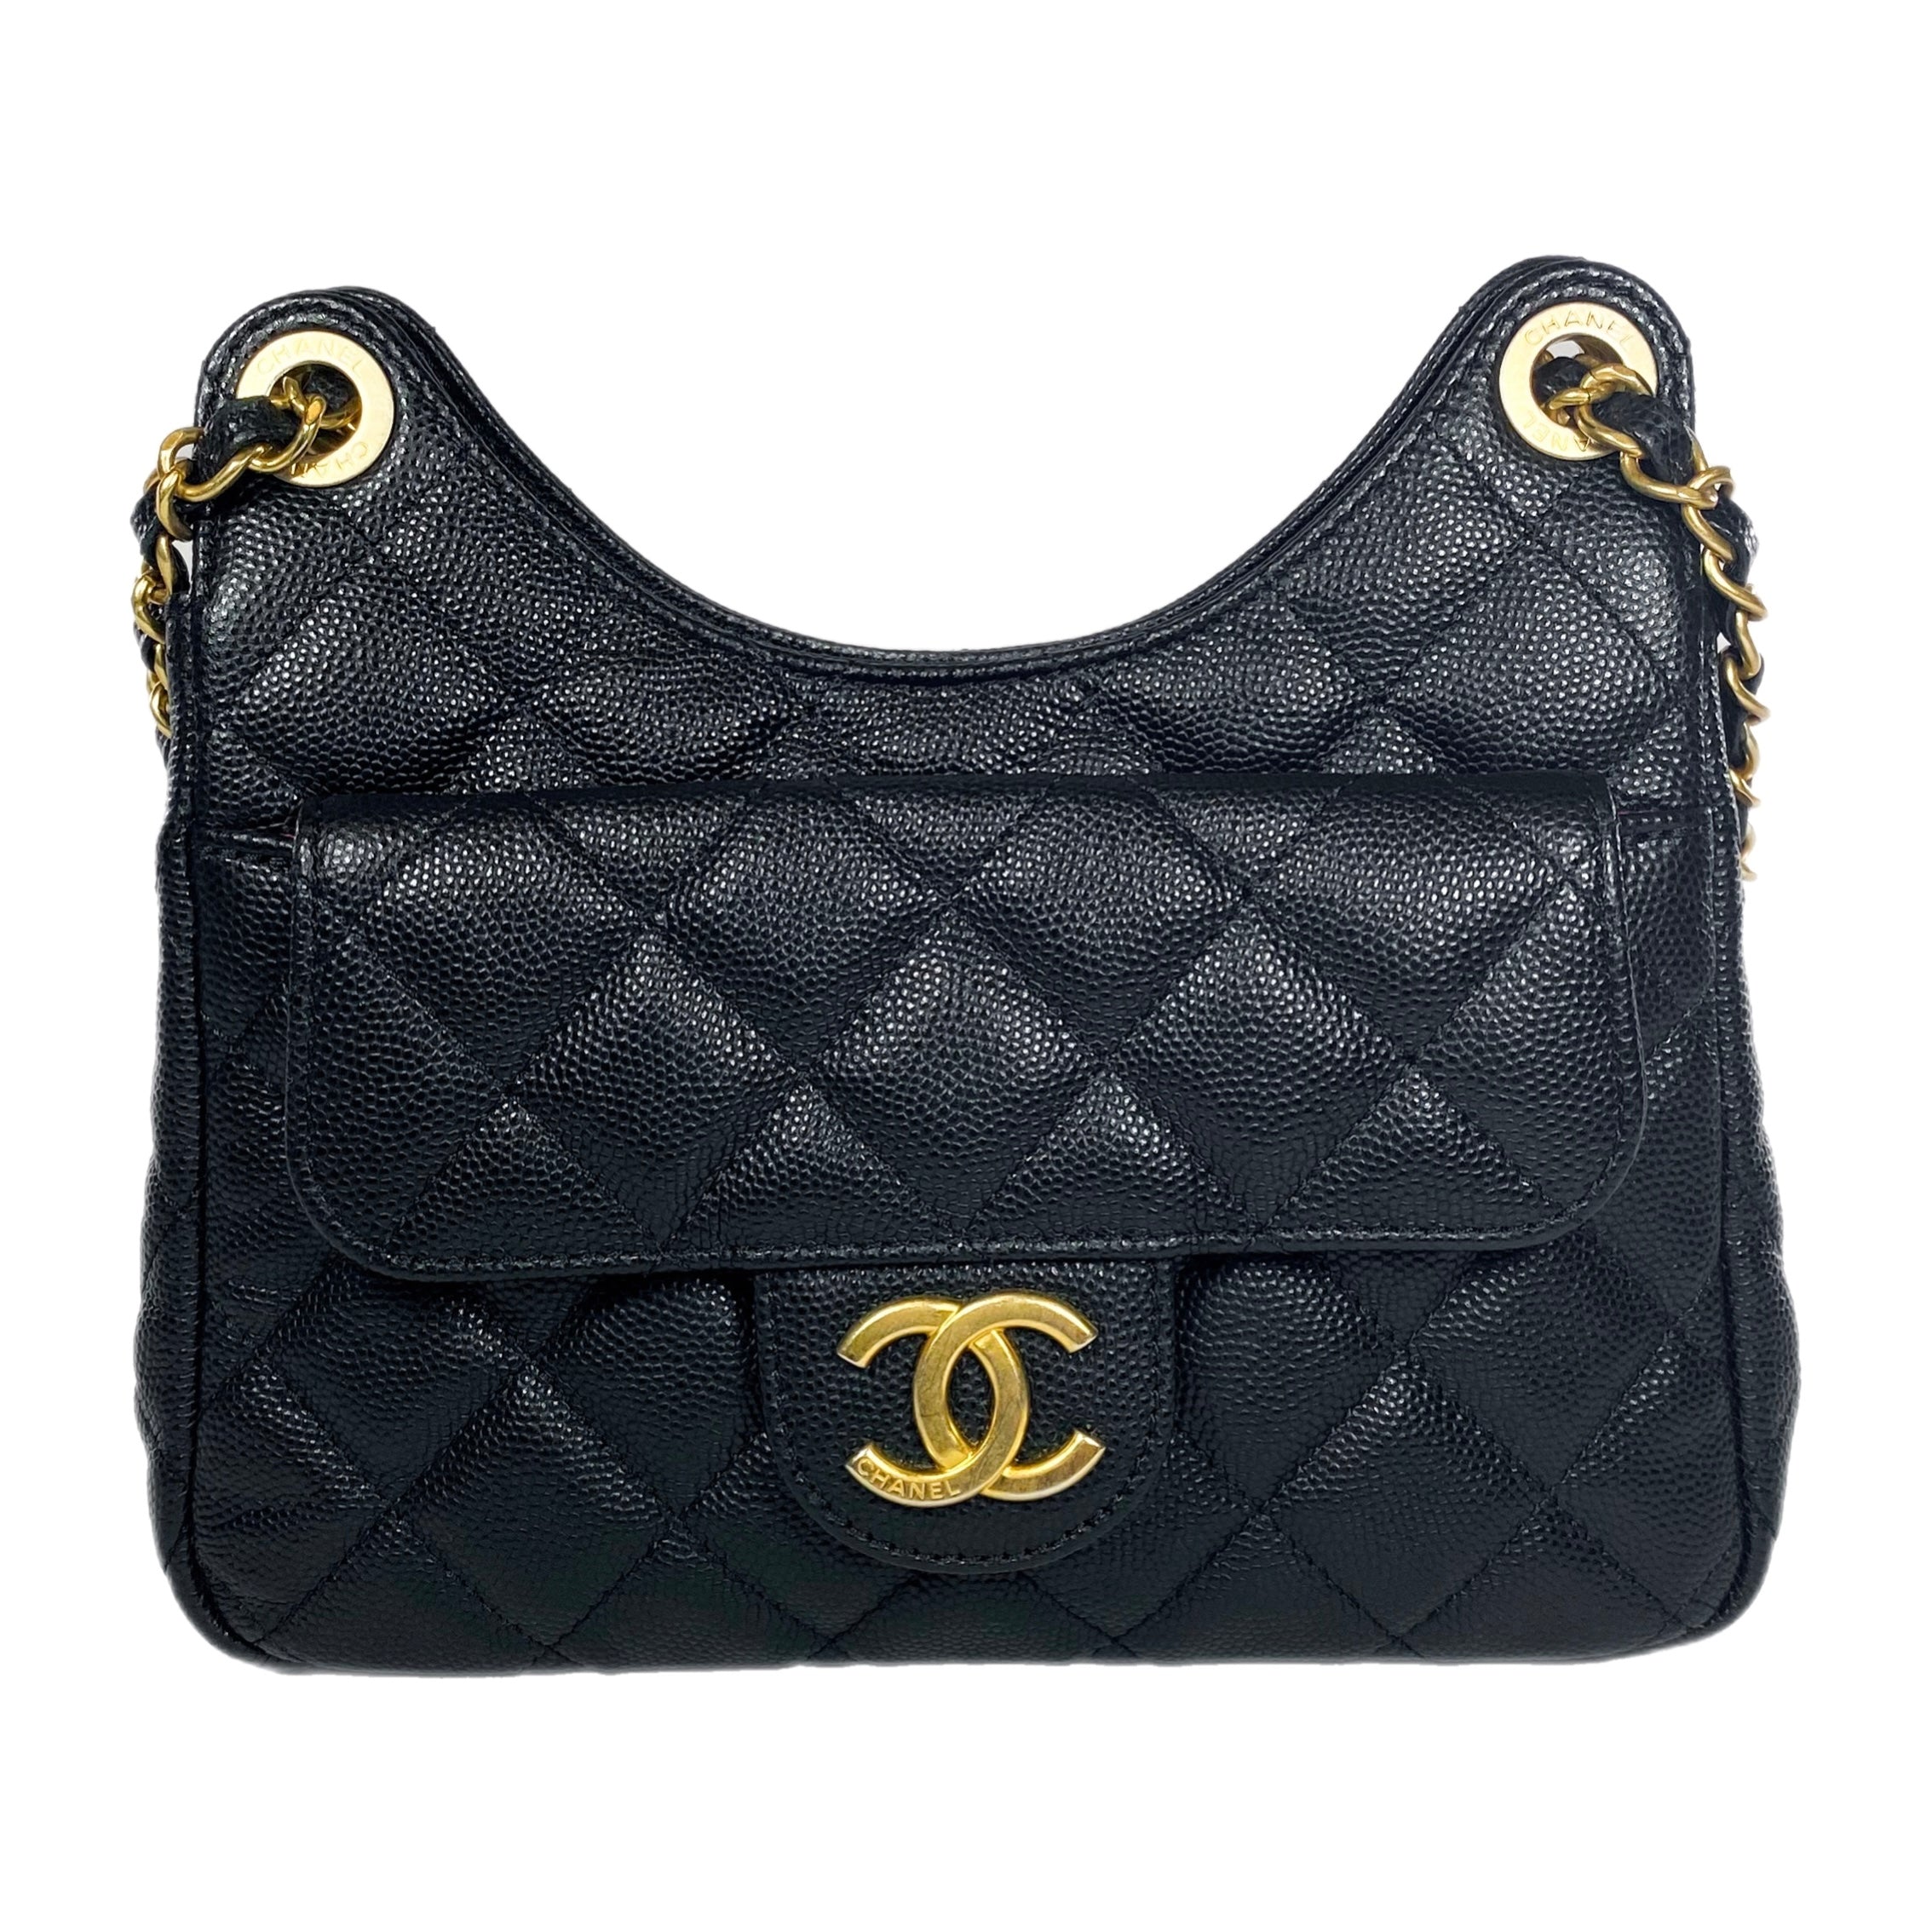 Chanel - Authenticated Timeless/Classique Wallet - Leather Black Plain for Women, Never Worn